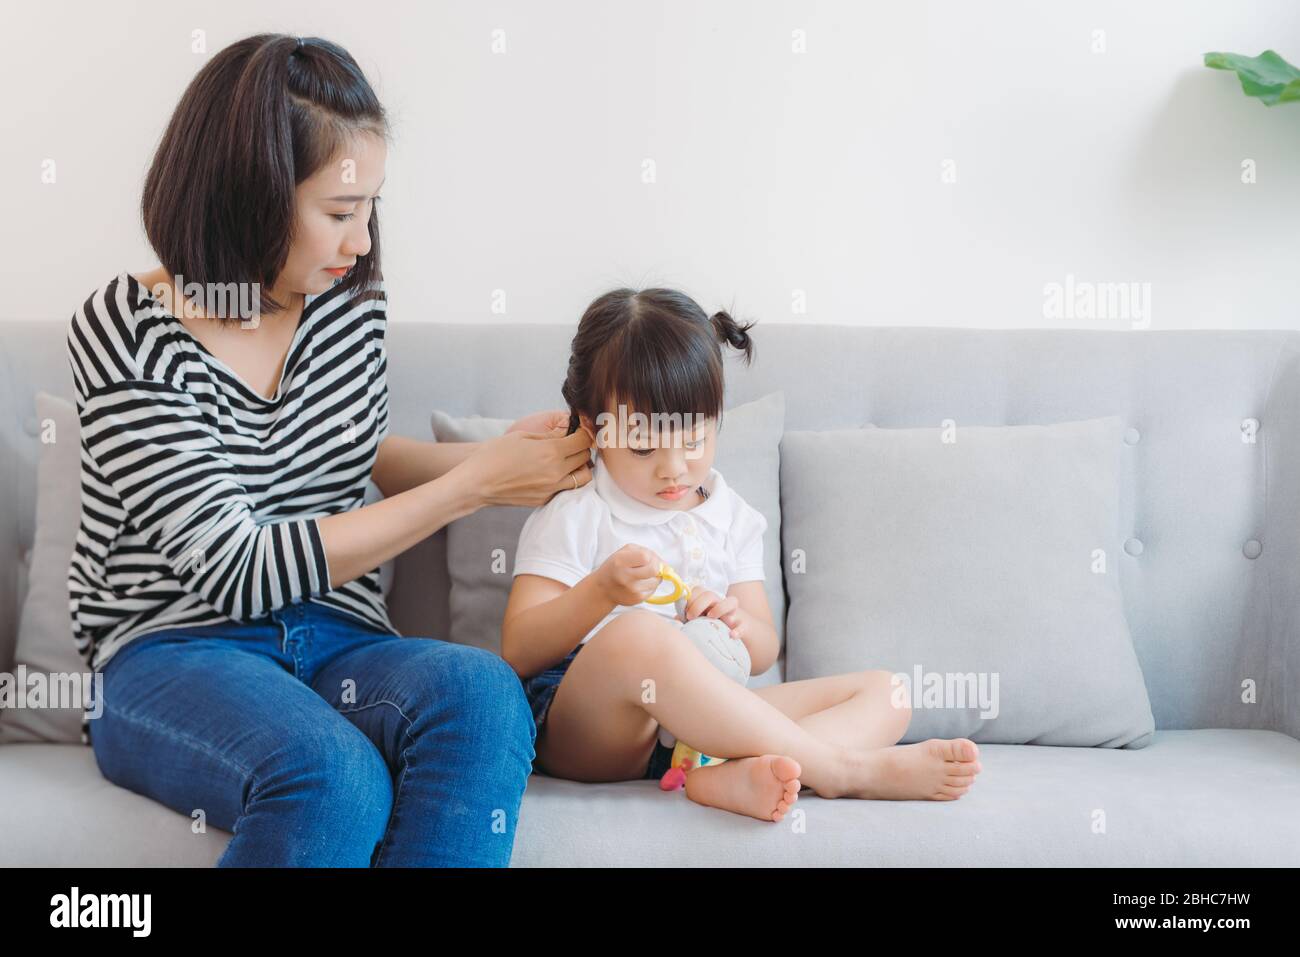 Mother combing daughter, care about hairstyle. Stock Photo